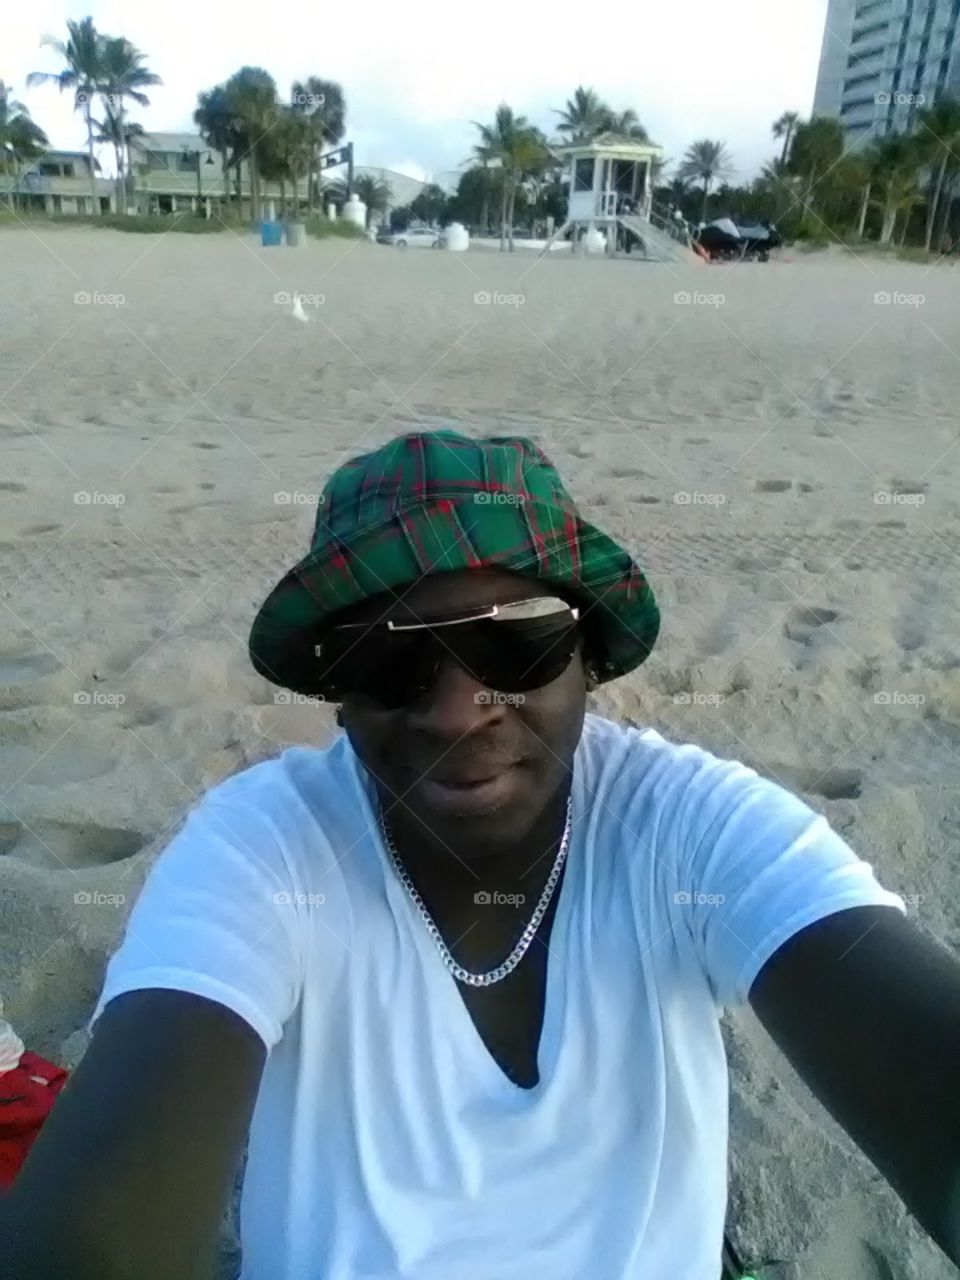 that's Charles Woods my ex fiance who left me on our first Christmas together and sending me pictures from the beach